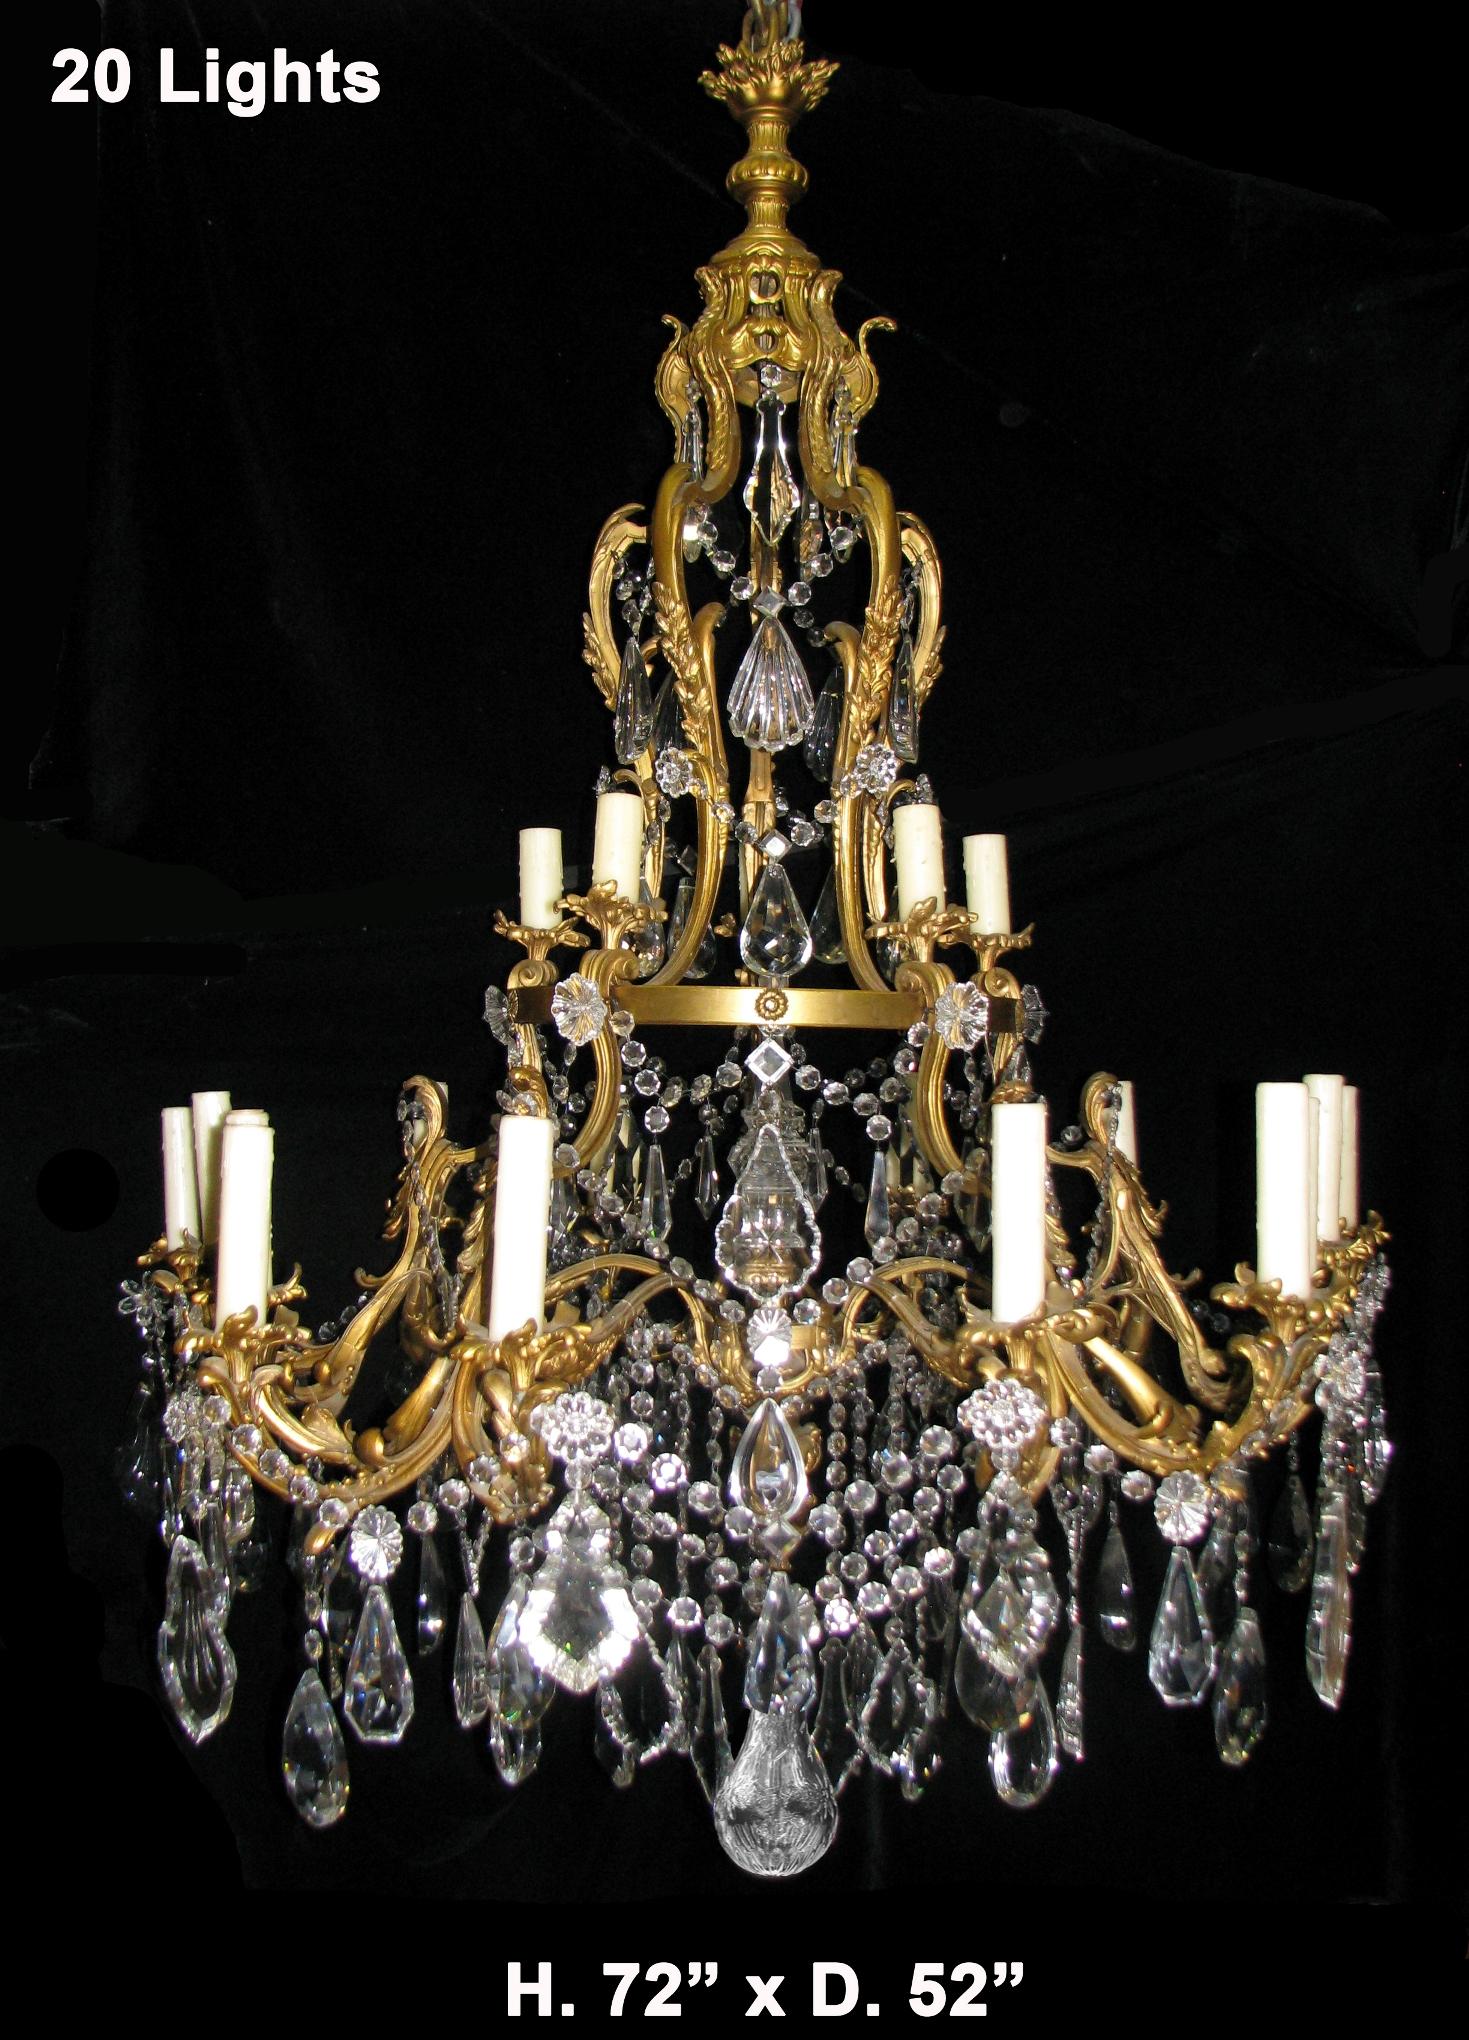 Spectacular large French Louis XV style ormolu and fine cut crystal two-tier twenty light chandelier,
19th century.

The chandelier is surmounted with a gilt bronze flame, above a central shaft issuing five laurel leaf decorated supports, the top